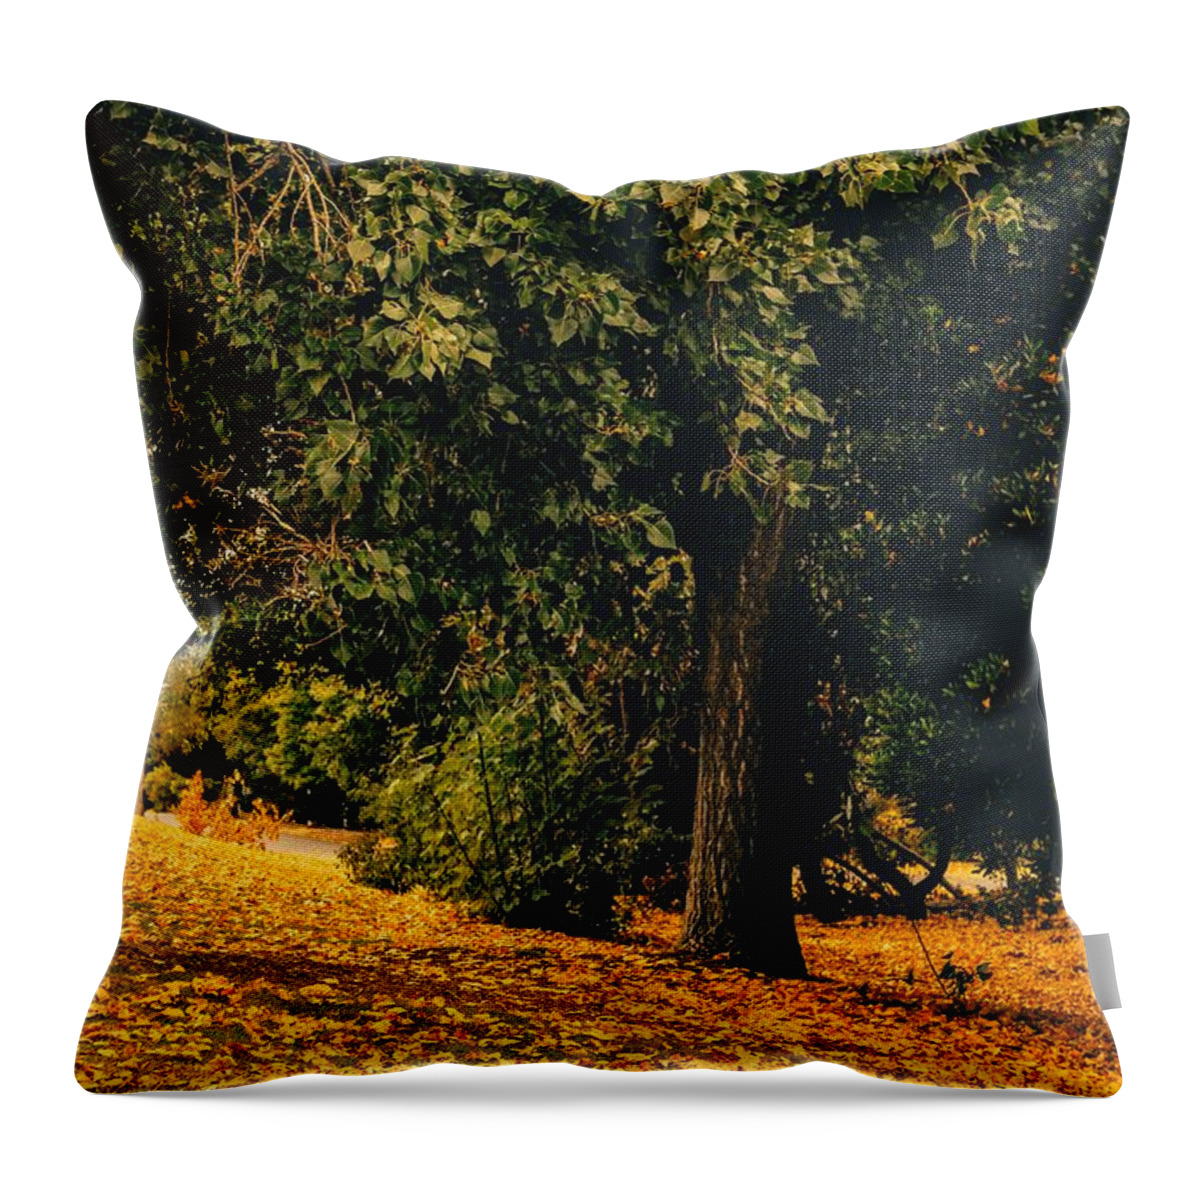 Fall Throw Pillow featuring the photograph Fall by Anamar Pictures